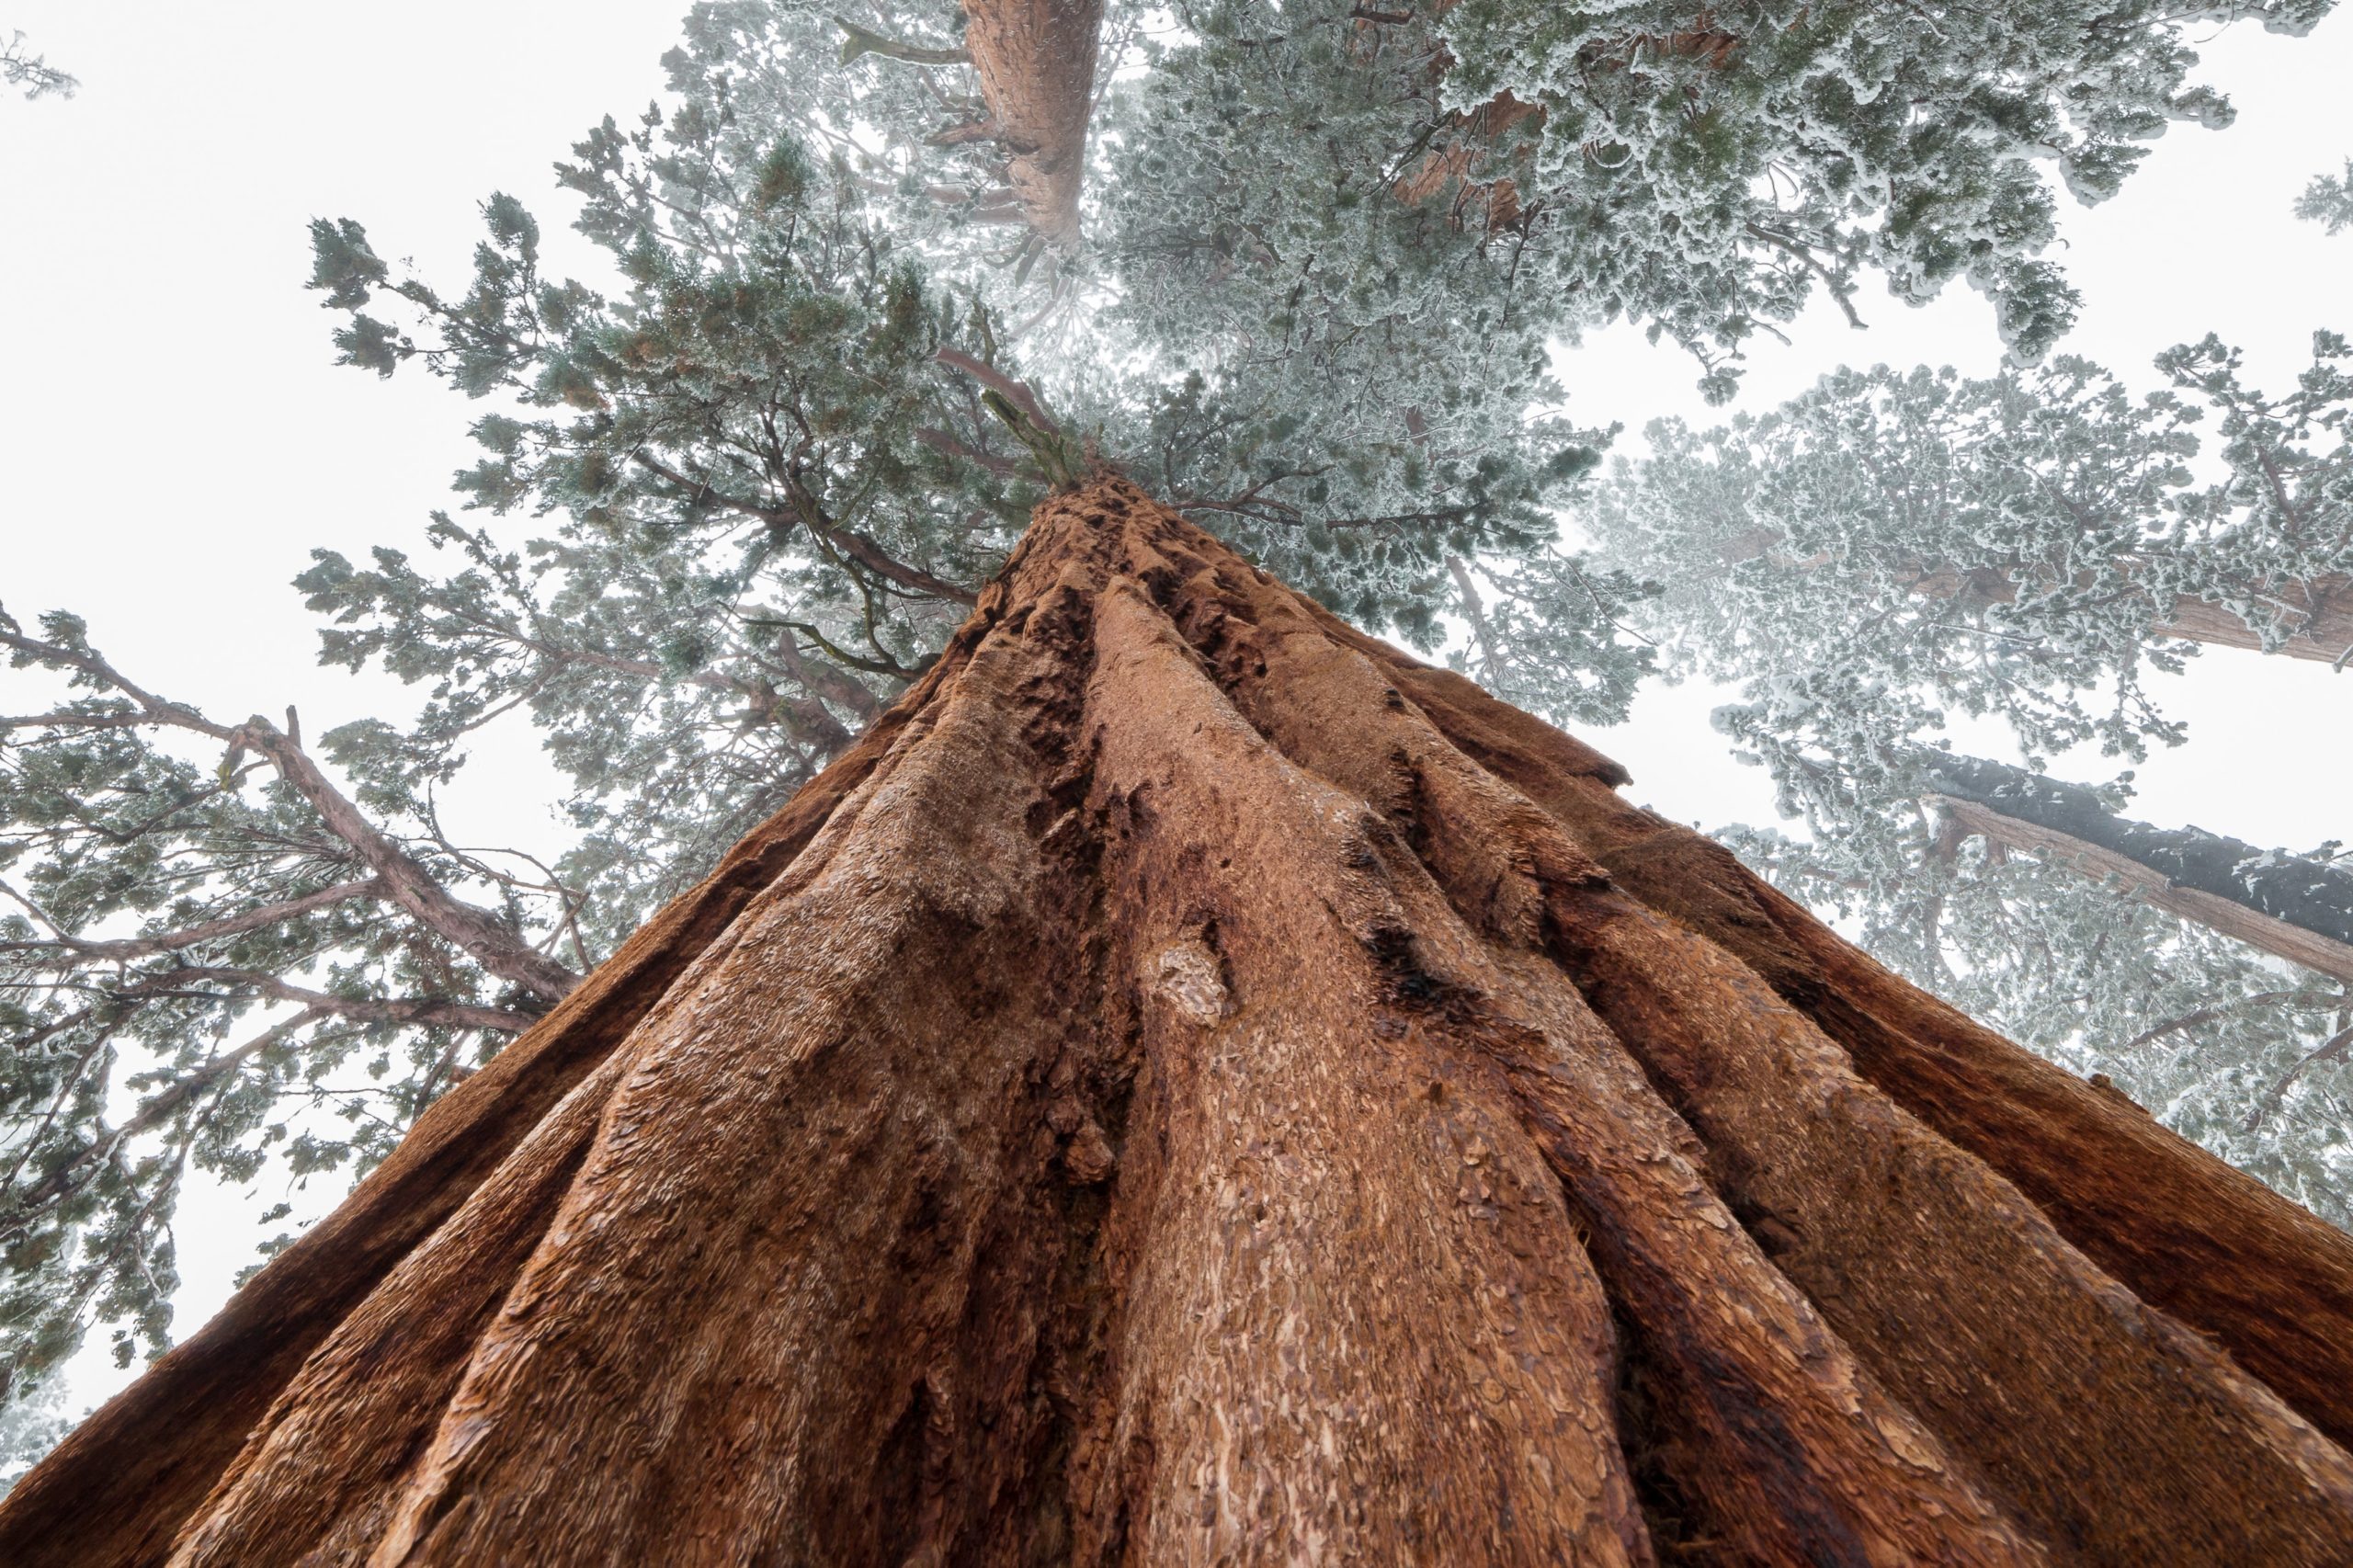 A tree in Sequoia National Park, by Nina Luong on Unsplash